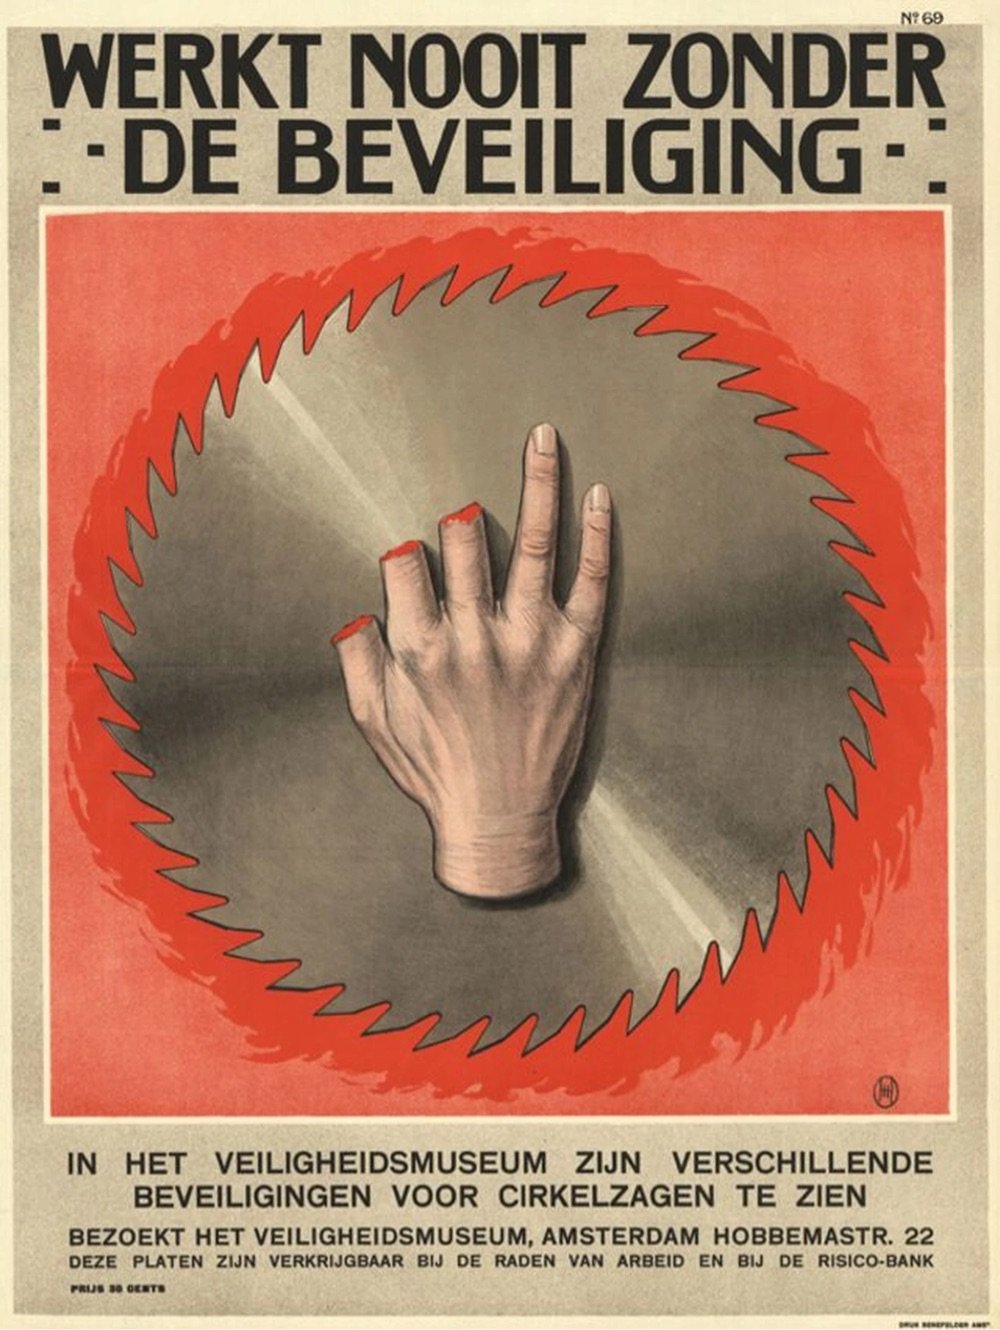 vintage Dutch safety poster showing a saw blade and a hand missing some fingers